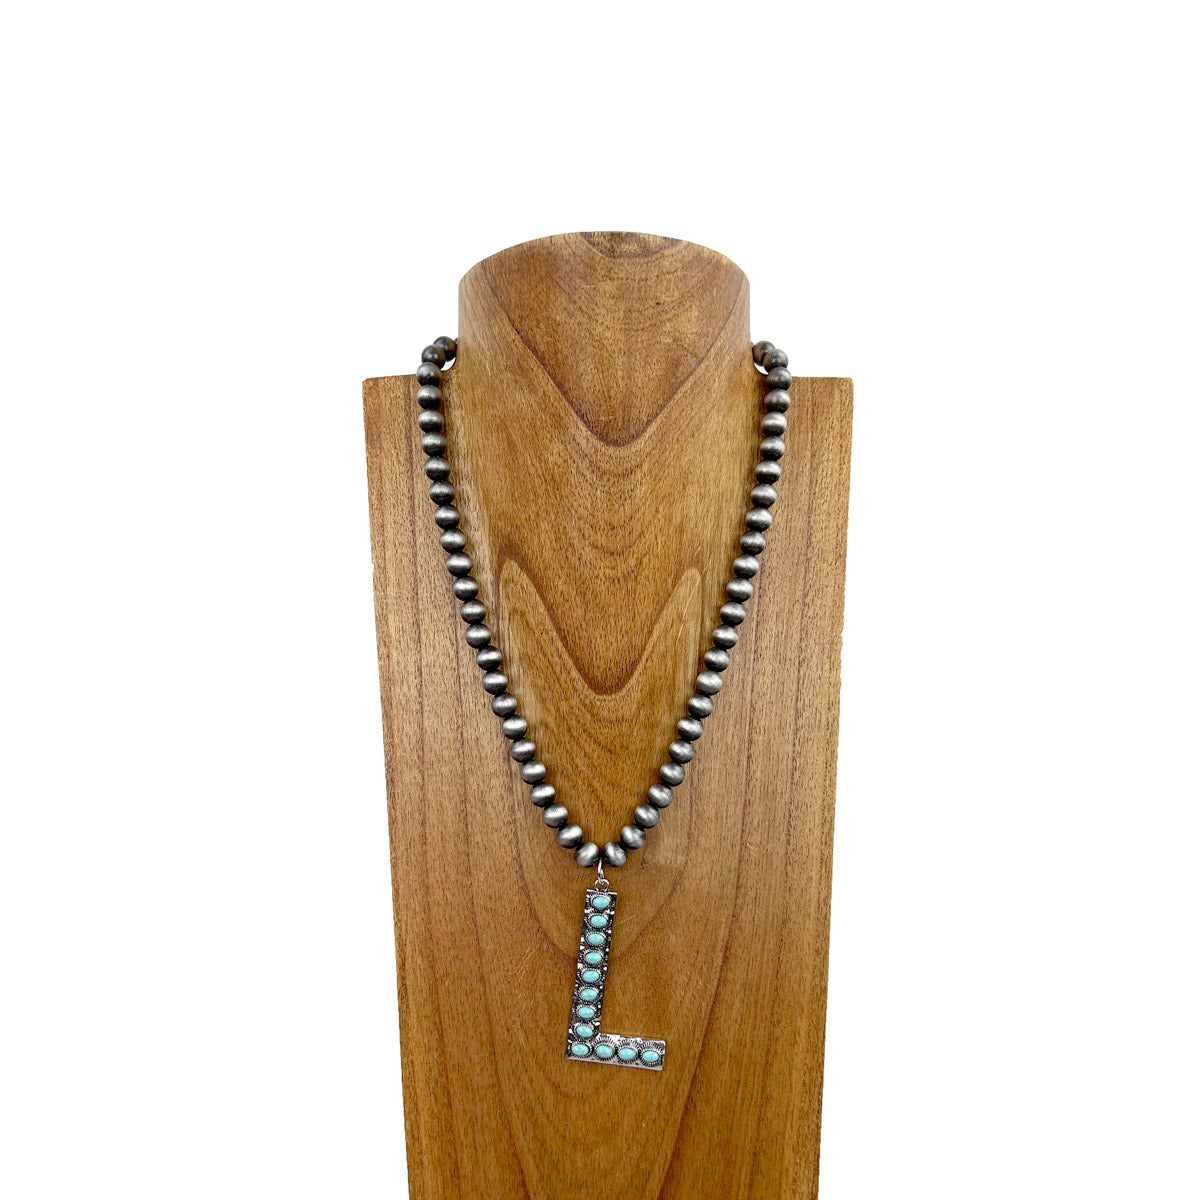 NKS230704L-BLUE	21 Inches 10mm silver Navajo pearl beads with blue turquoise stone letter L pendant Necklace